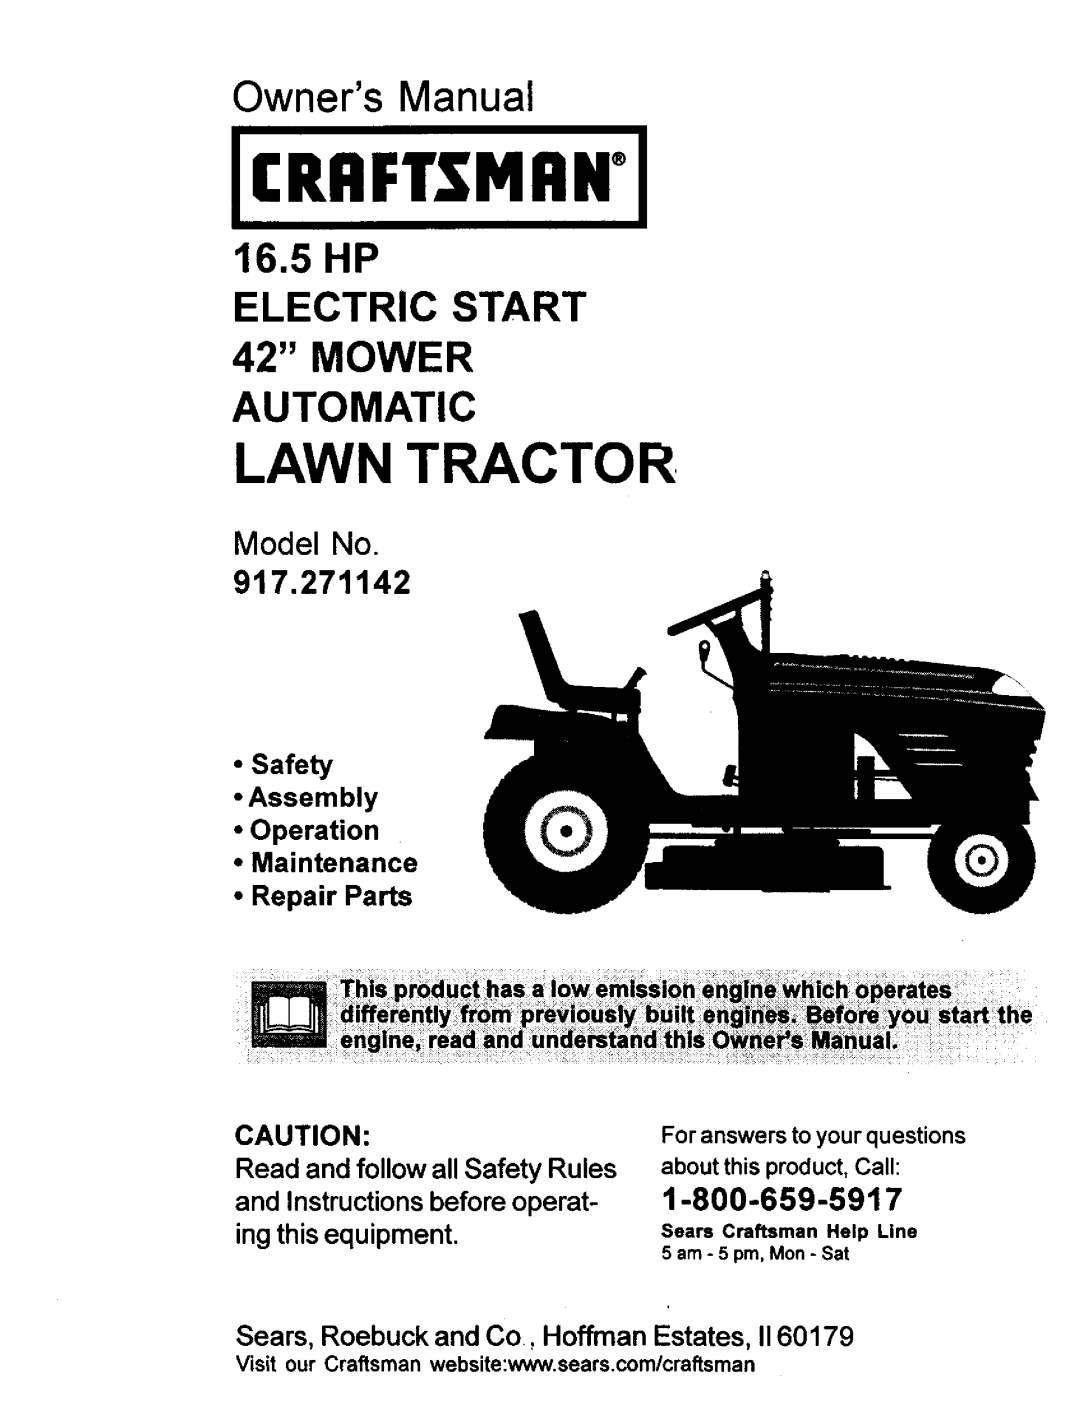 Craftsman 917.271142 manual Owners Manual, about this product, Call, For answers to your questions, Icraftsmani, Model No 